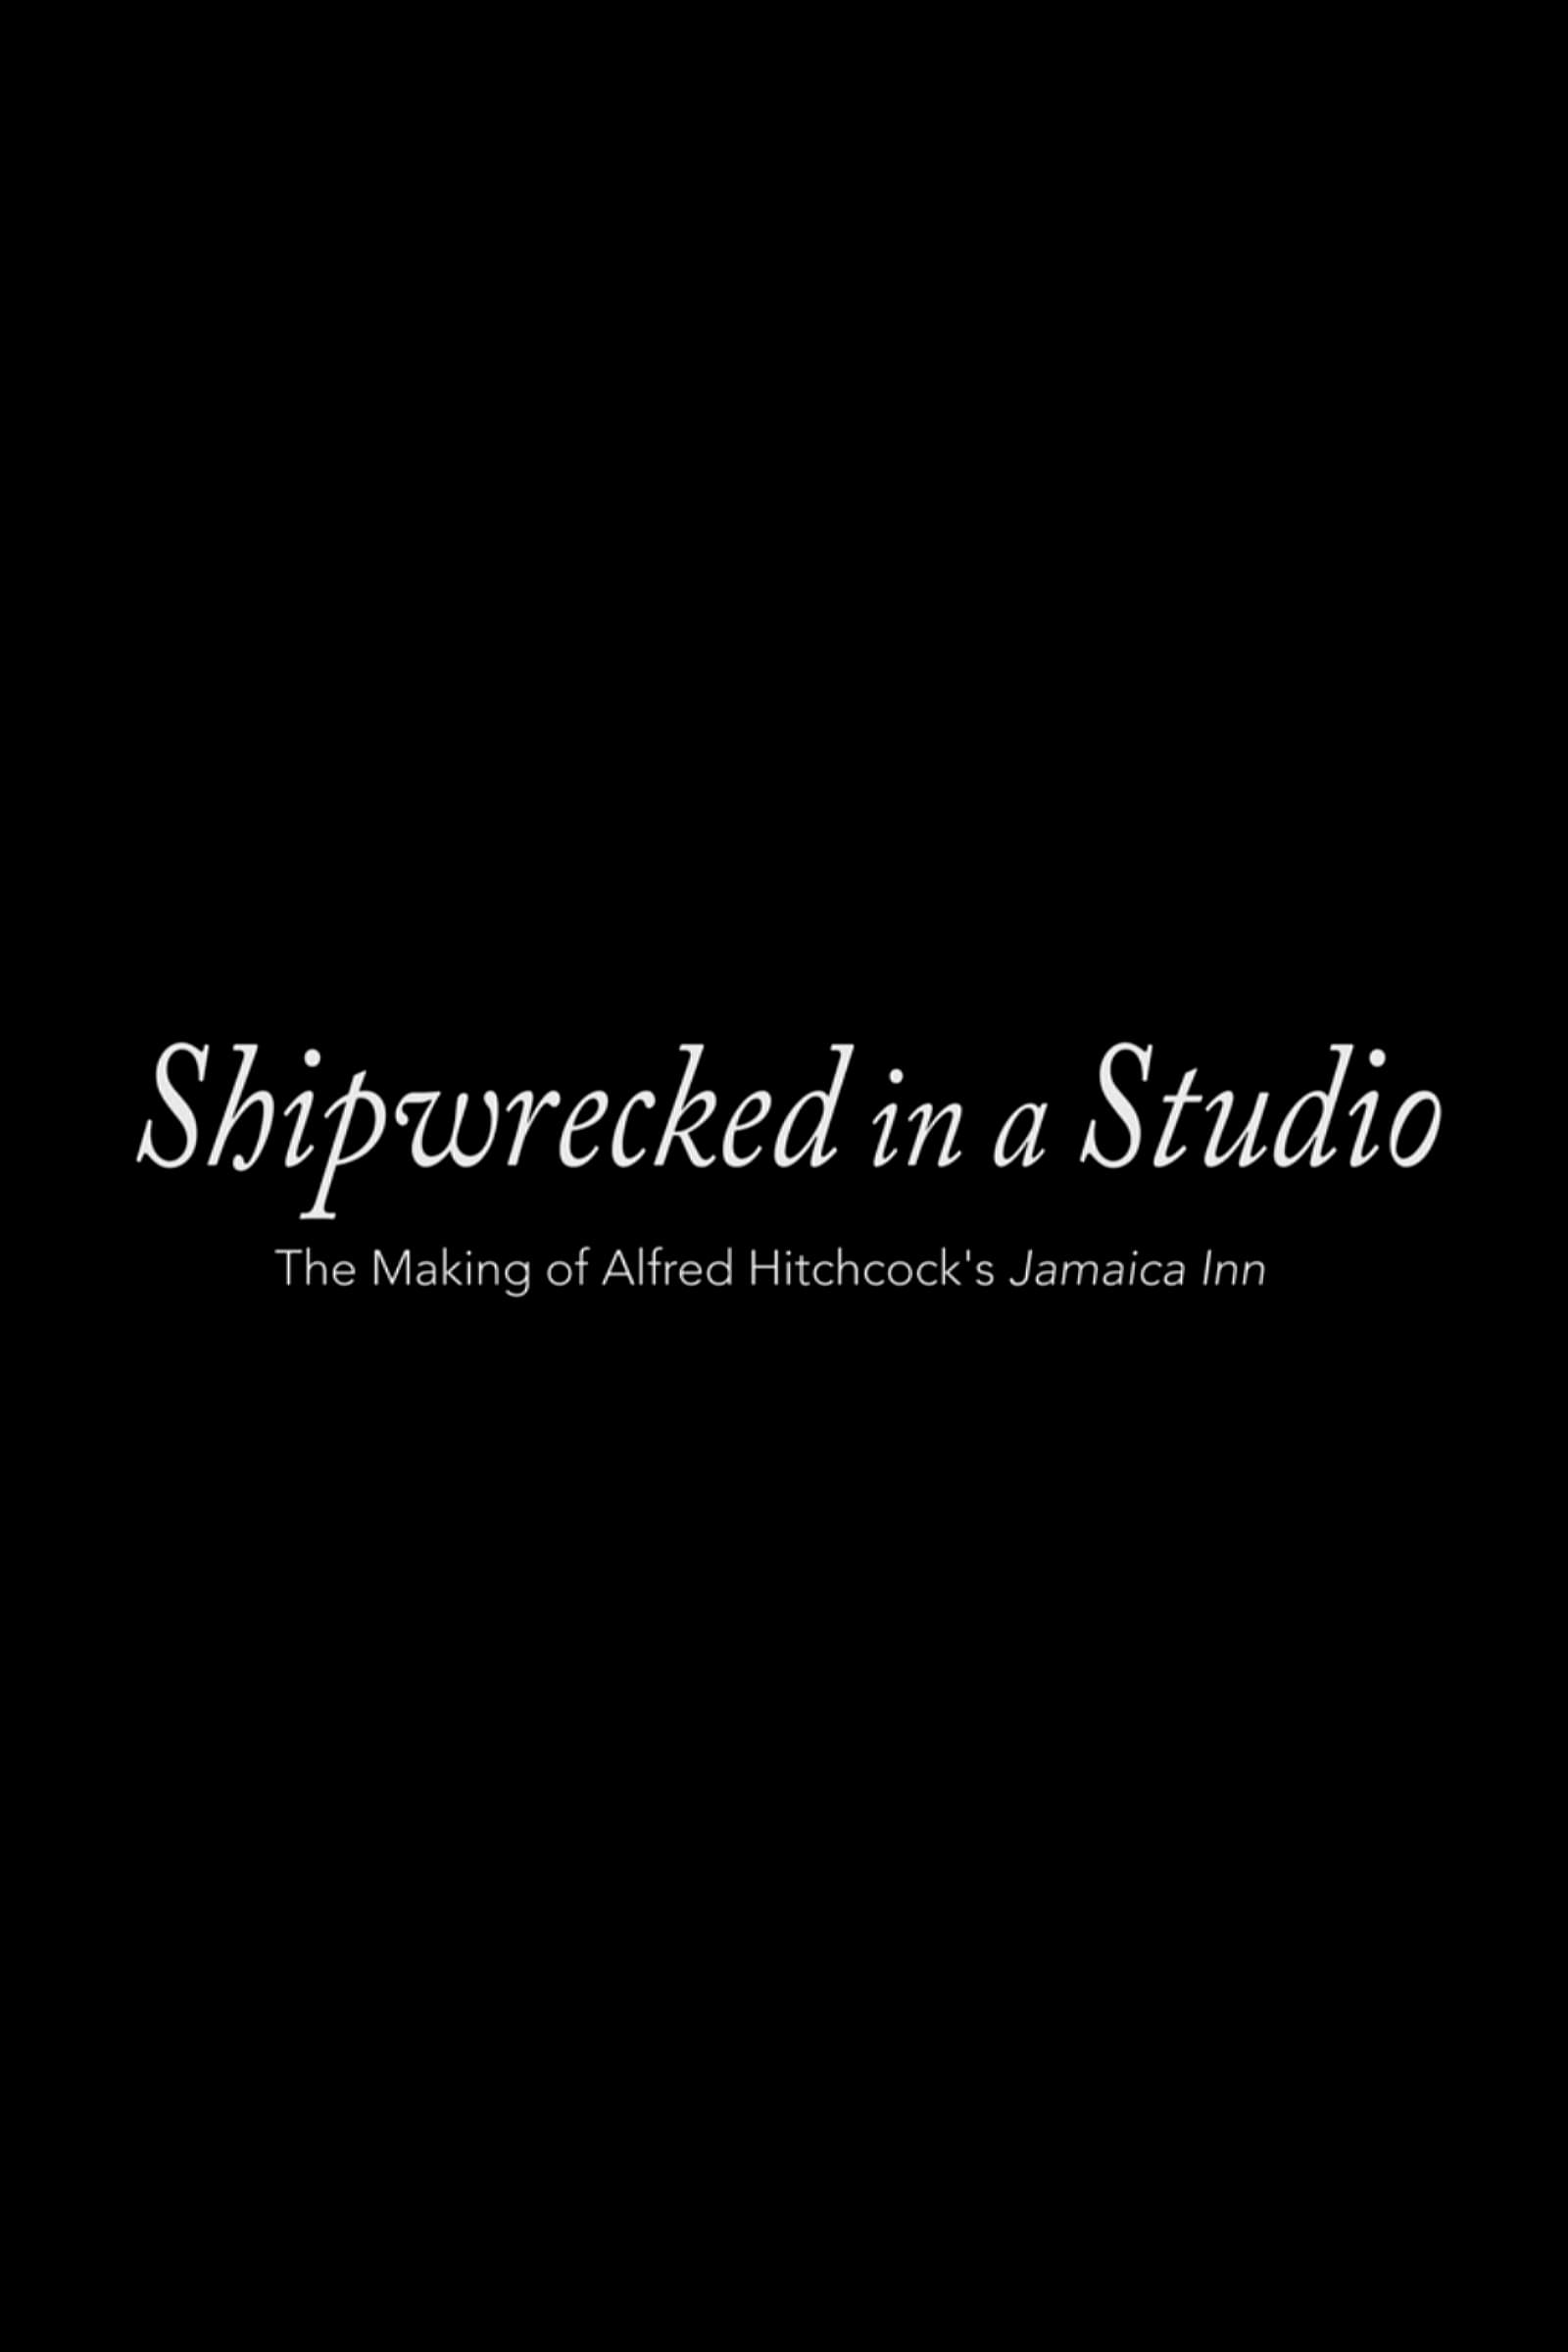 Shipwrecked in a Studio: The Making of Alfred Hitchcock's Jamaica Inn